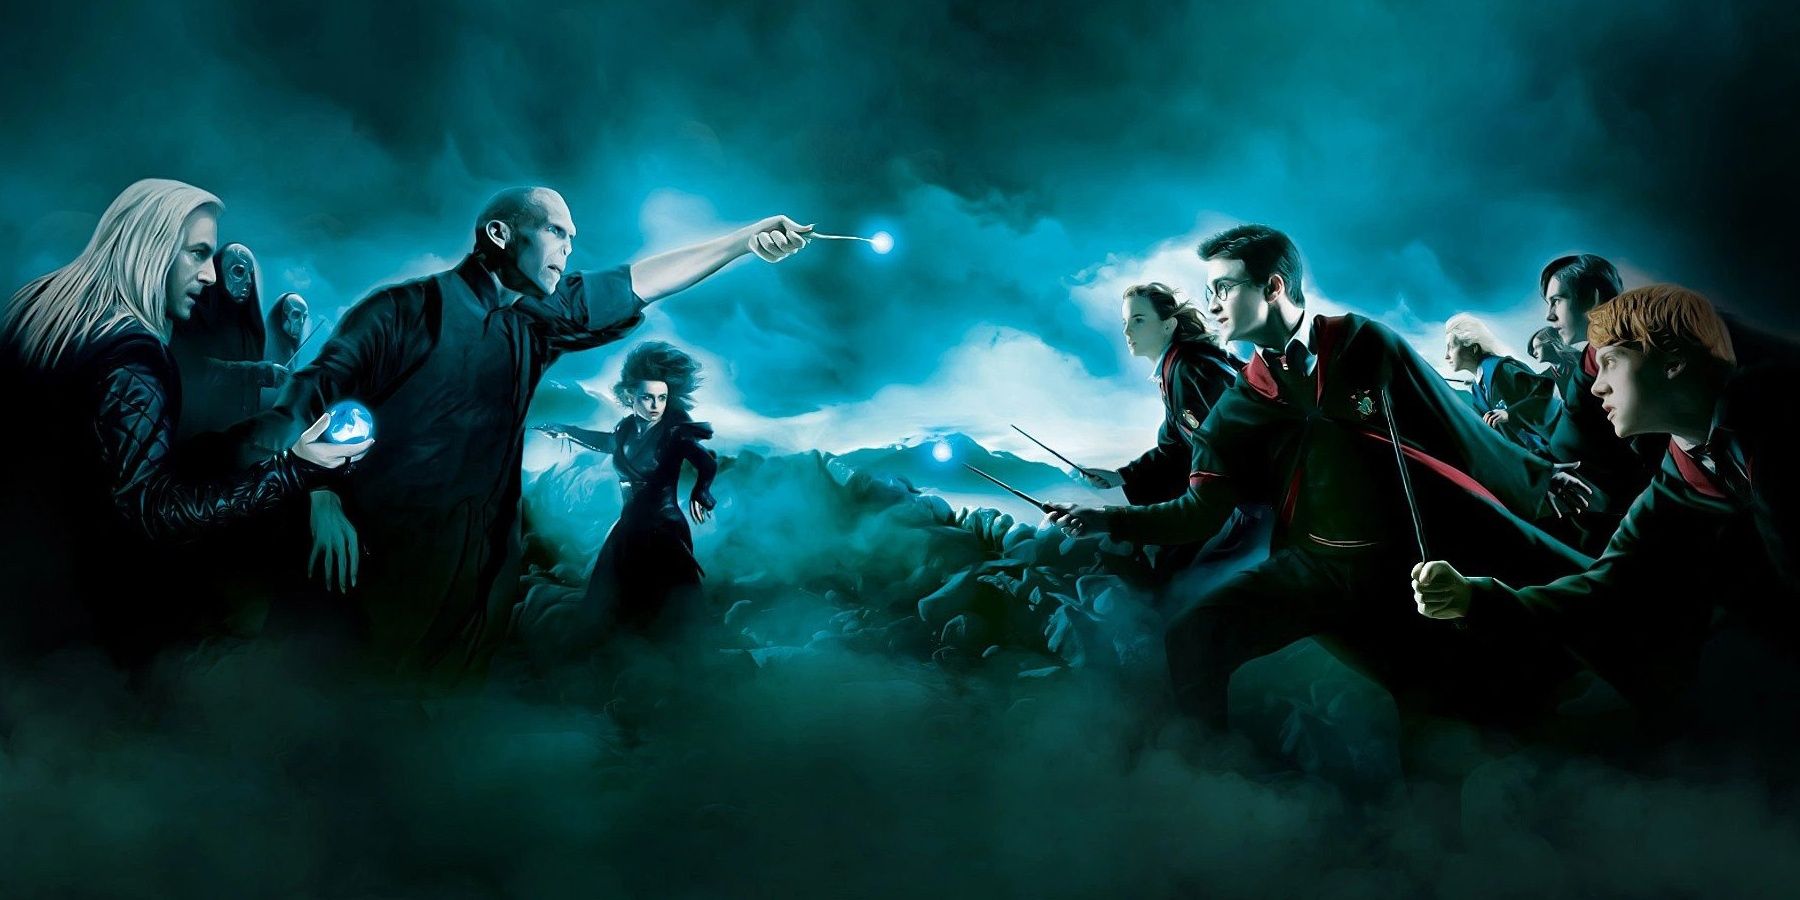 Harry Potter Duel between Harry and his friends and Voldemort and his Death Eaters